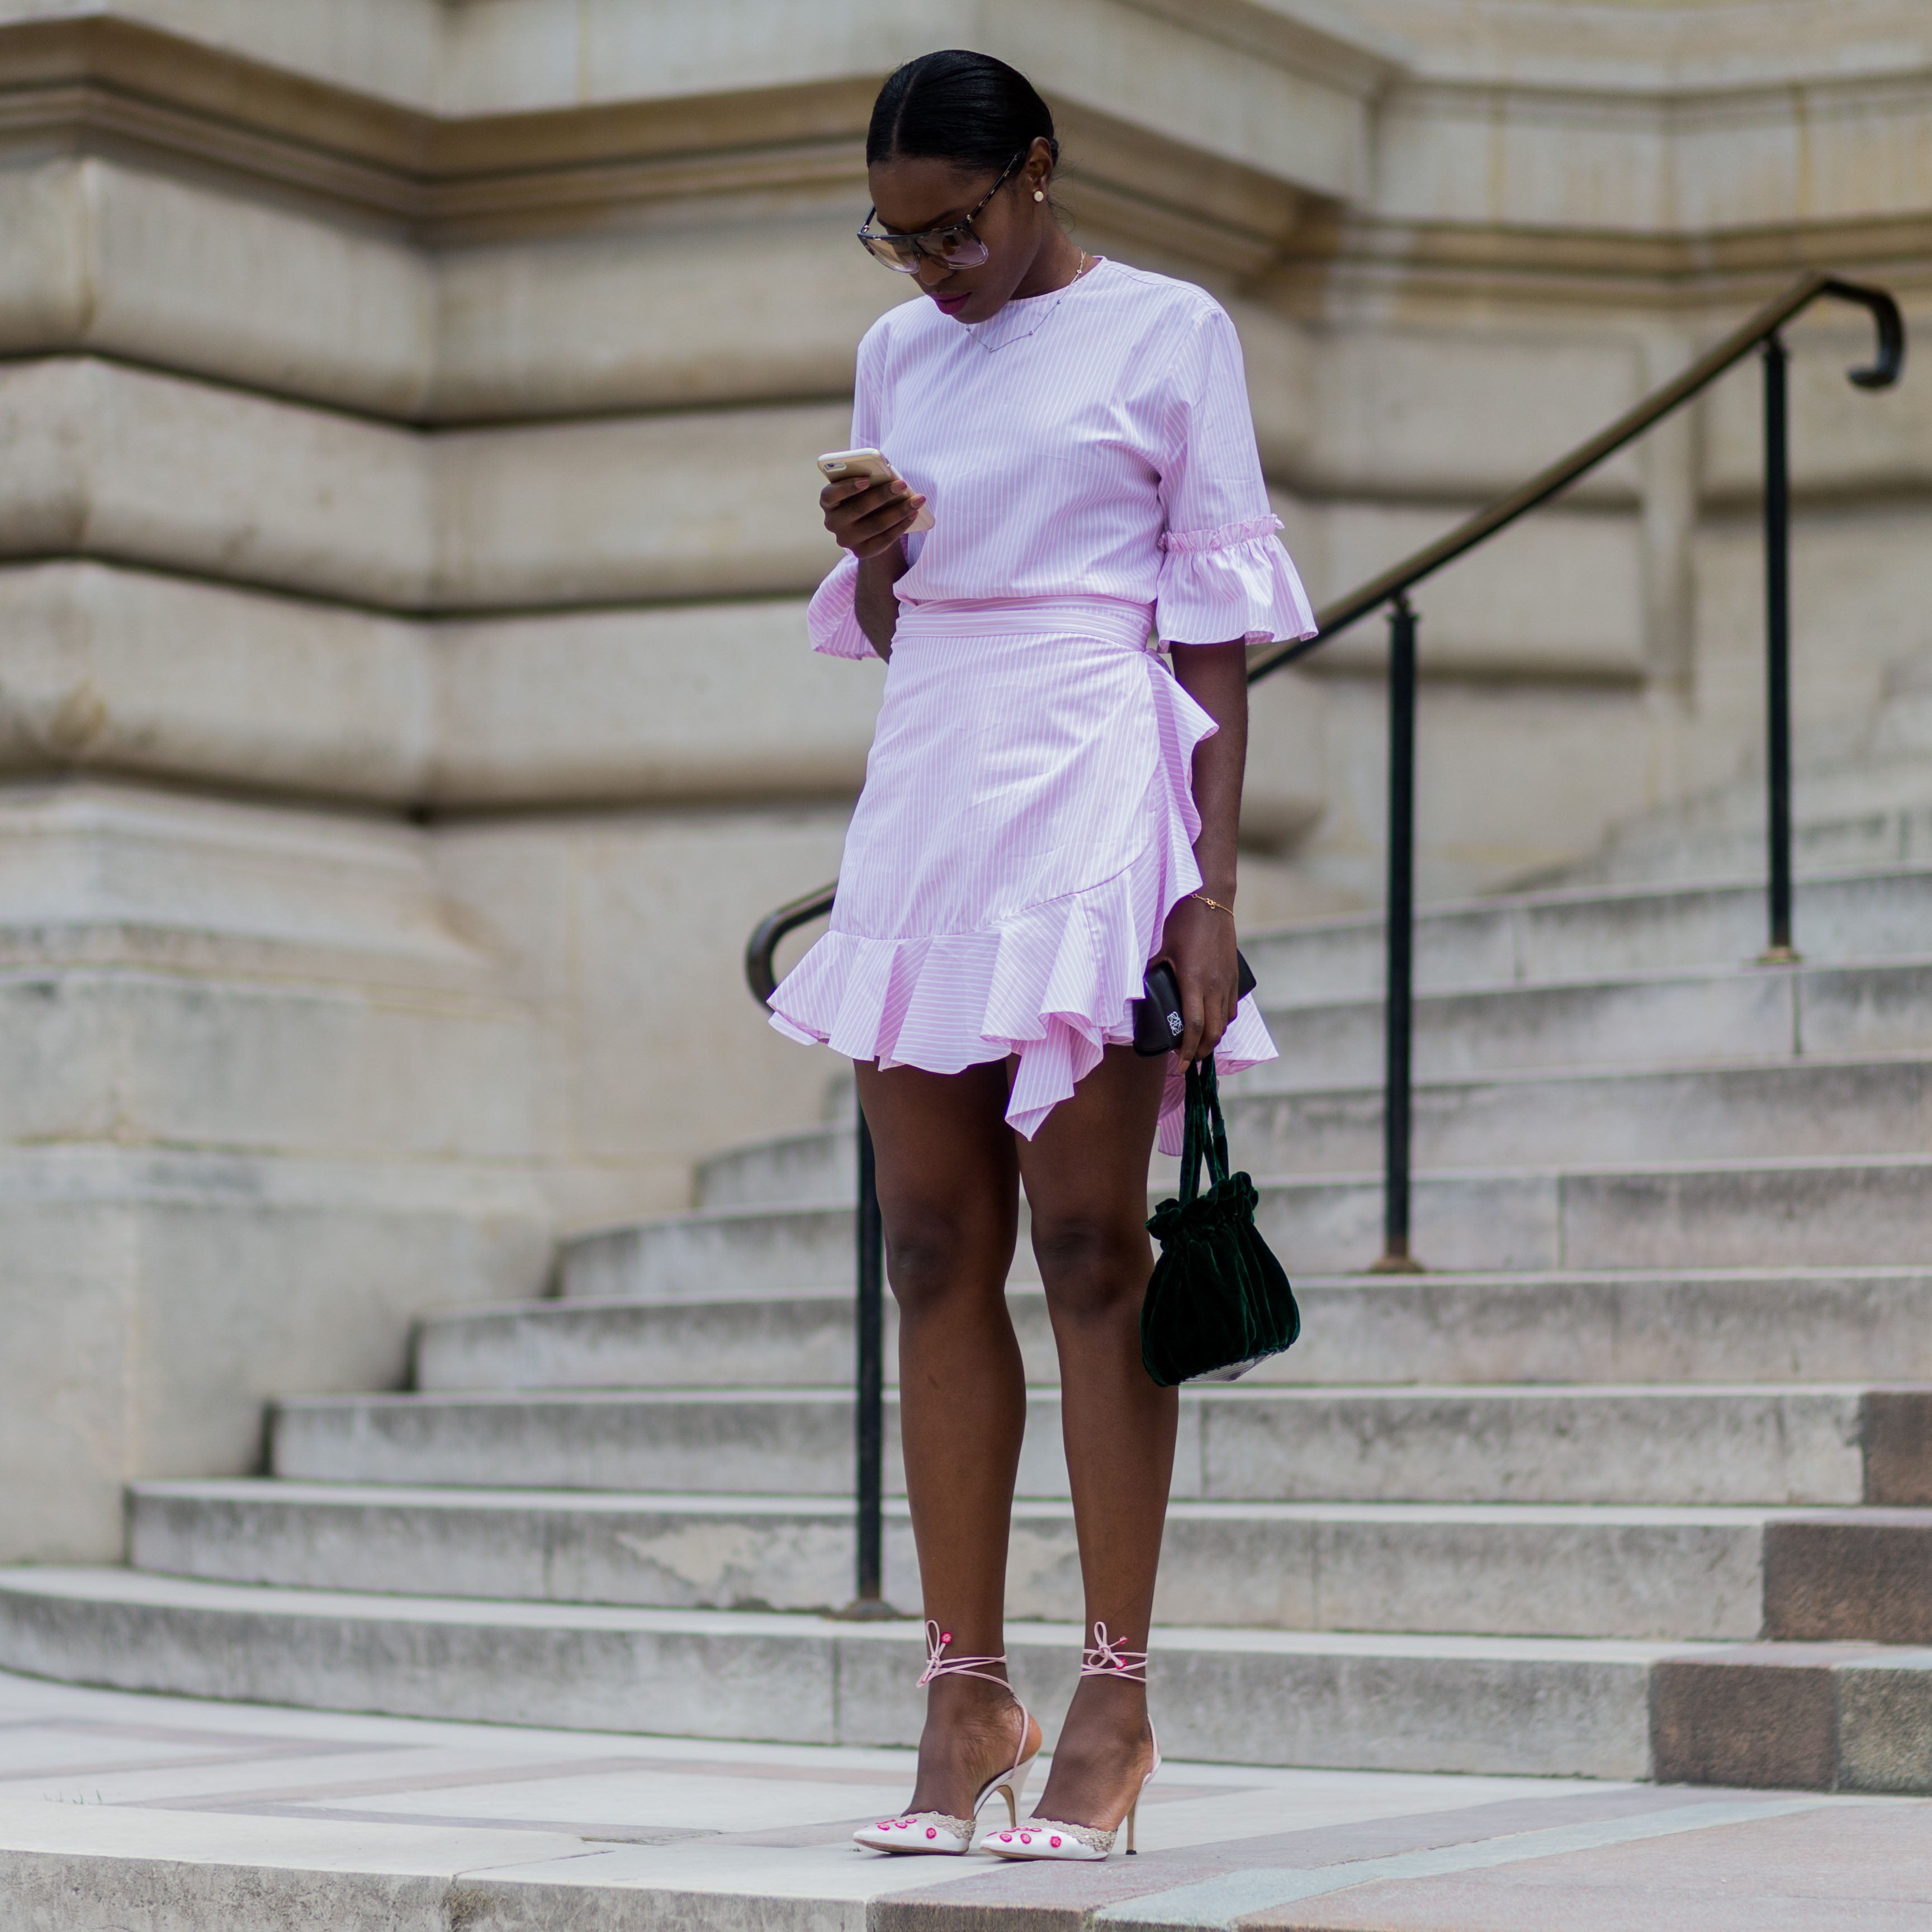 These Are the 100 Street Style Looks That Reigned Supreme in 2016
